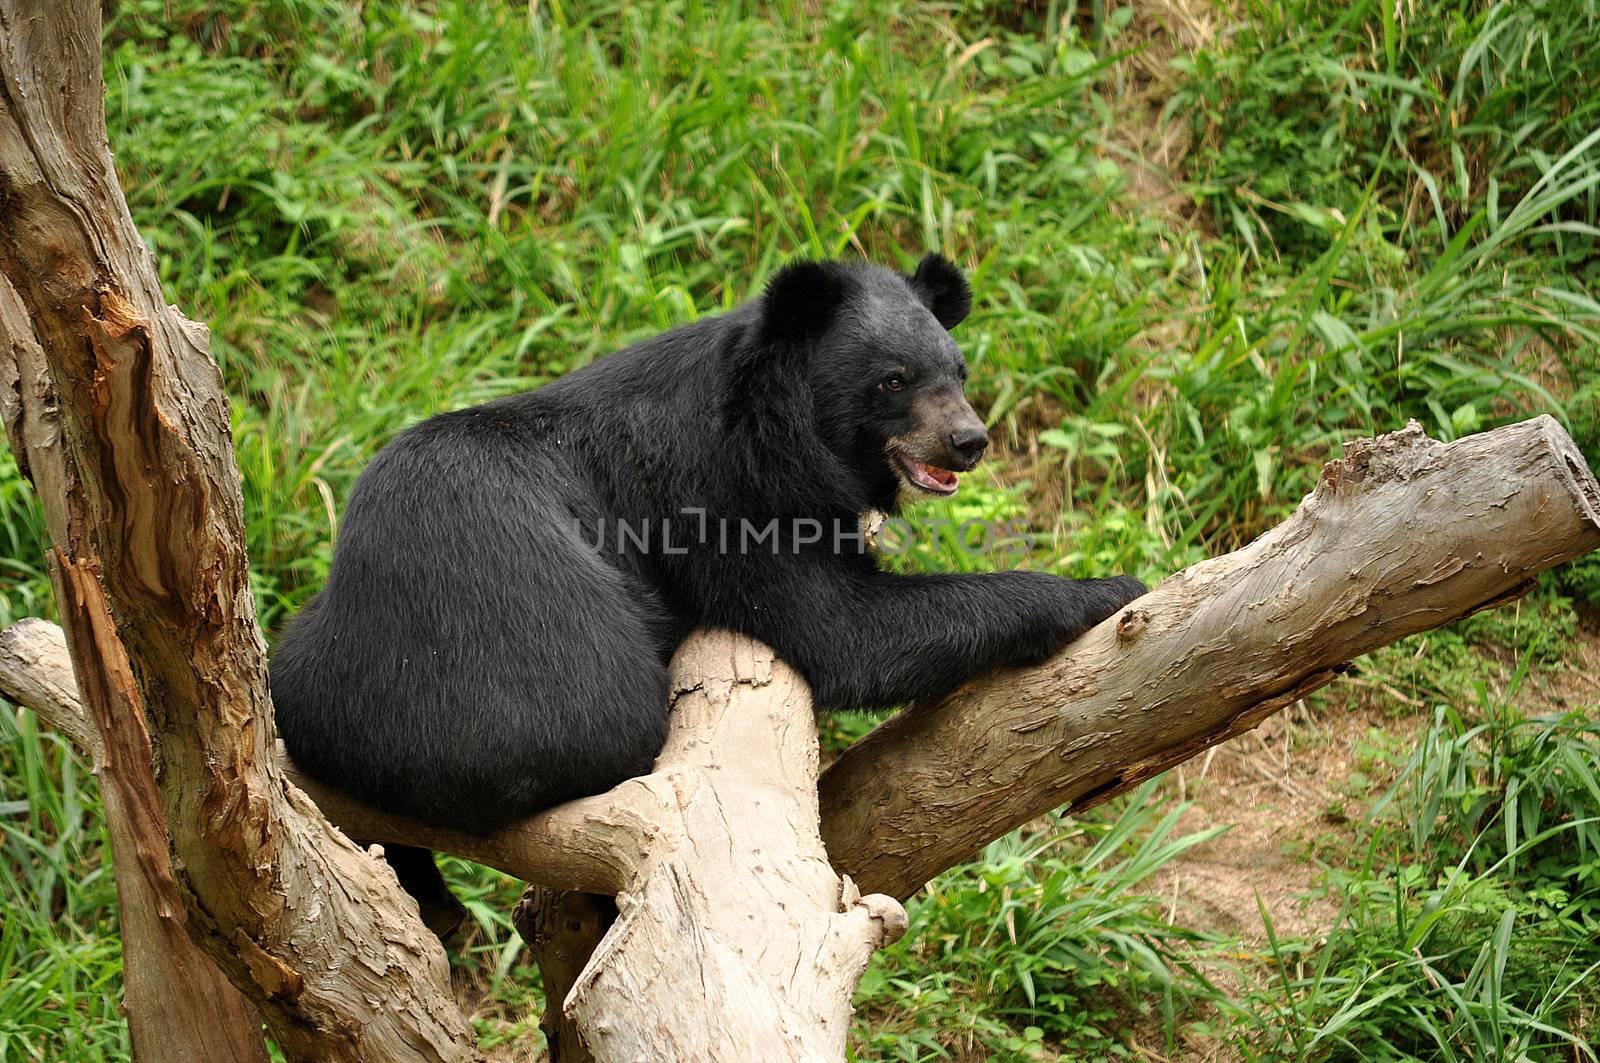 Asian black bears are reproductively compatible with several other bear species, and have on occasion produced hybrid offspring.